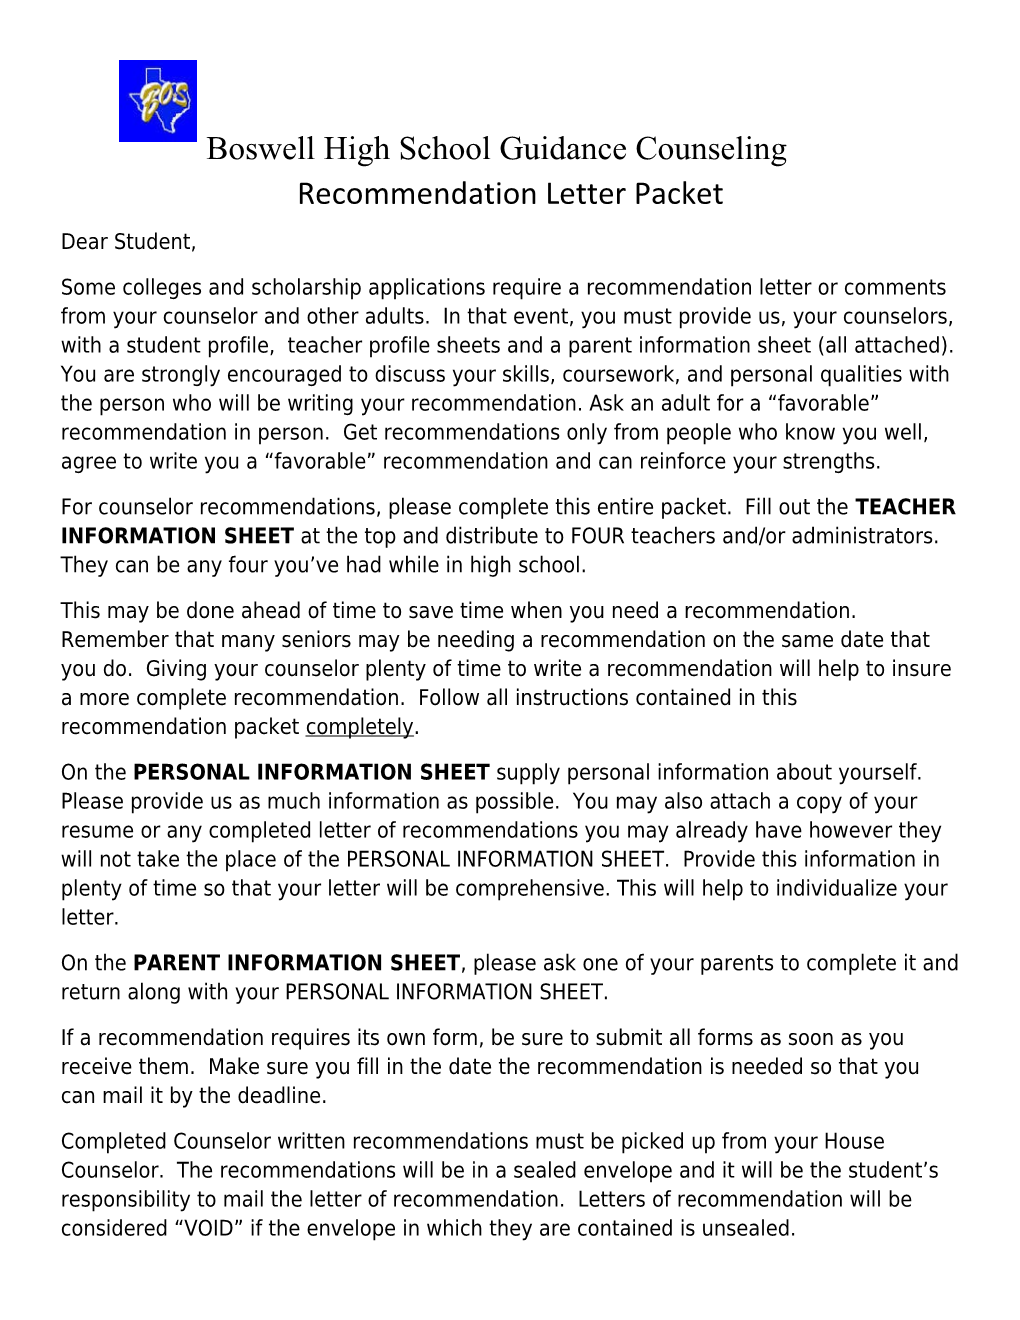 Recommendation Letter Packet